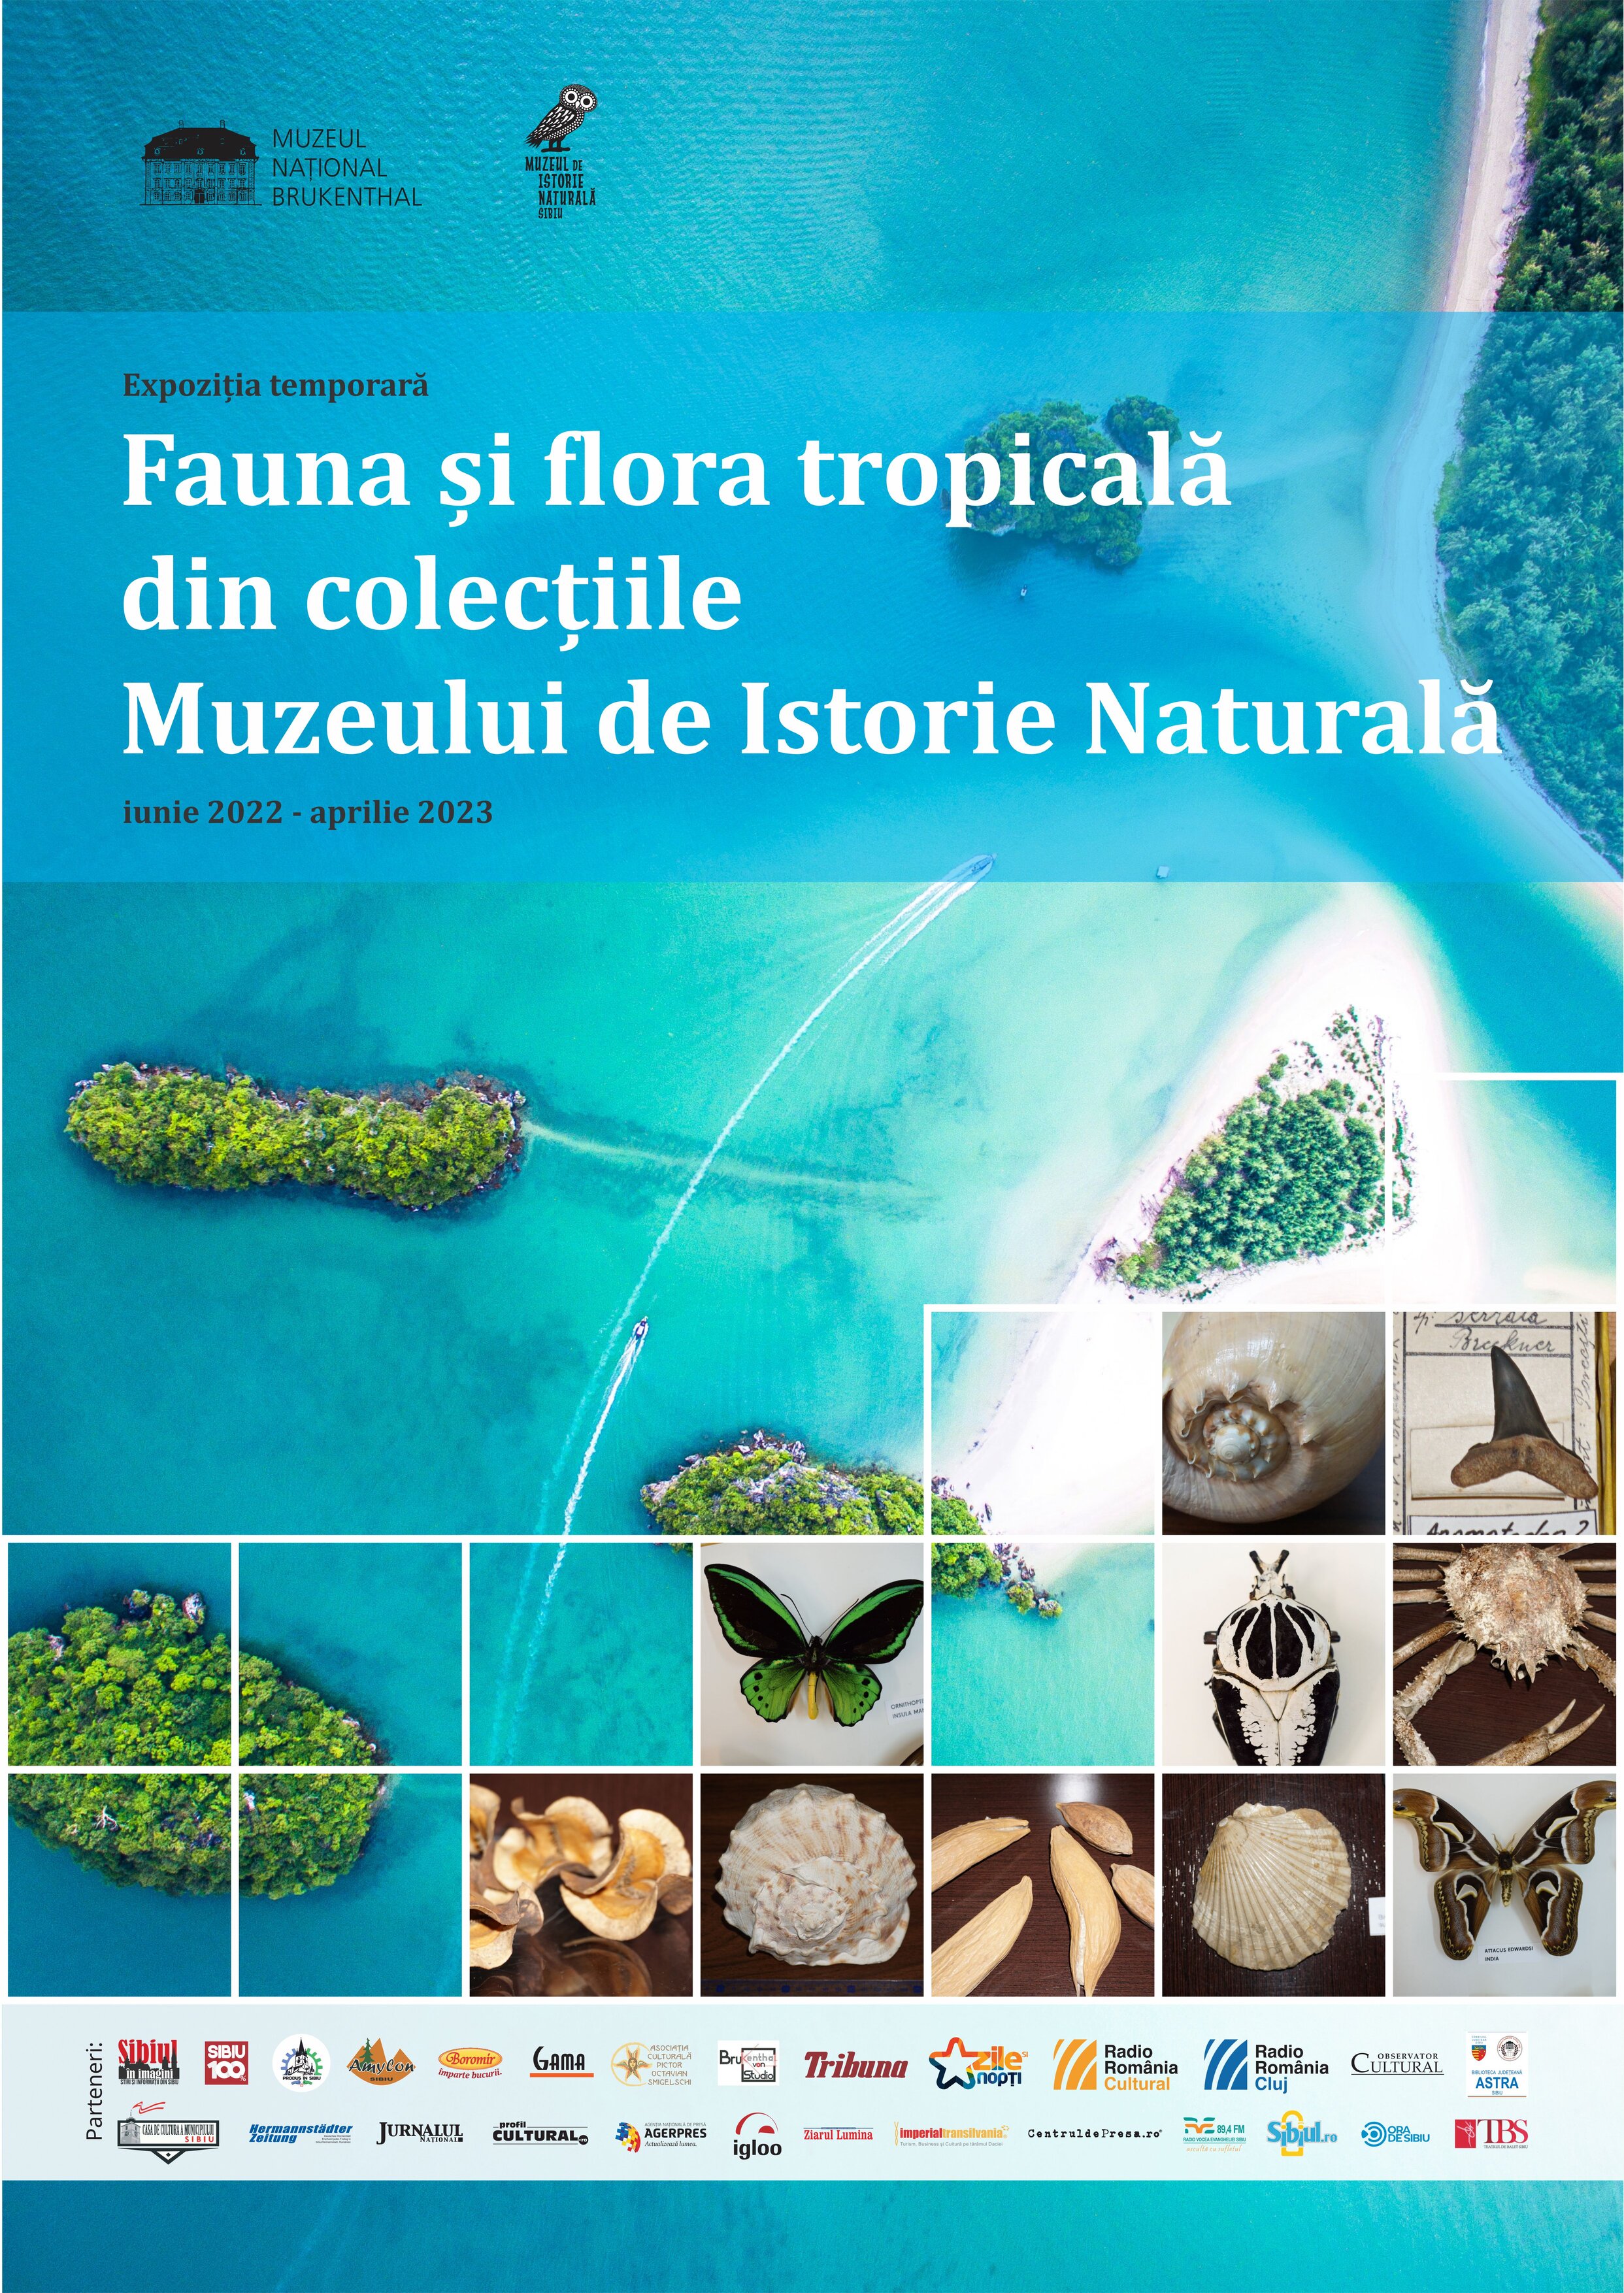 The tropical fauna and flora from the museum's collections